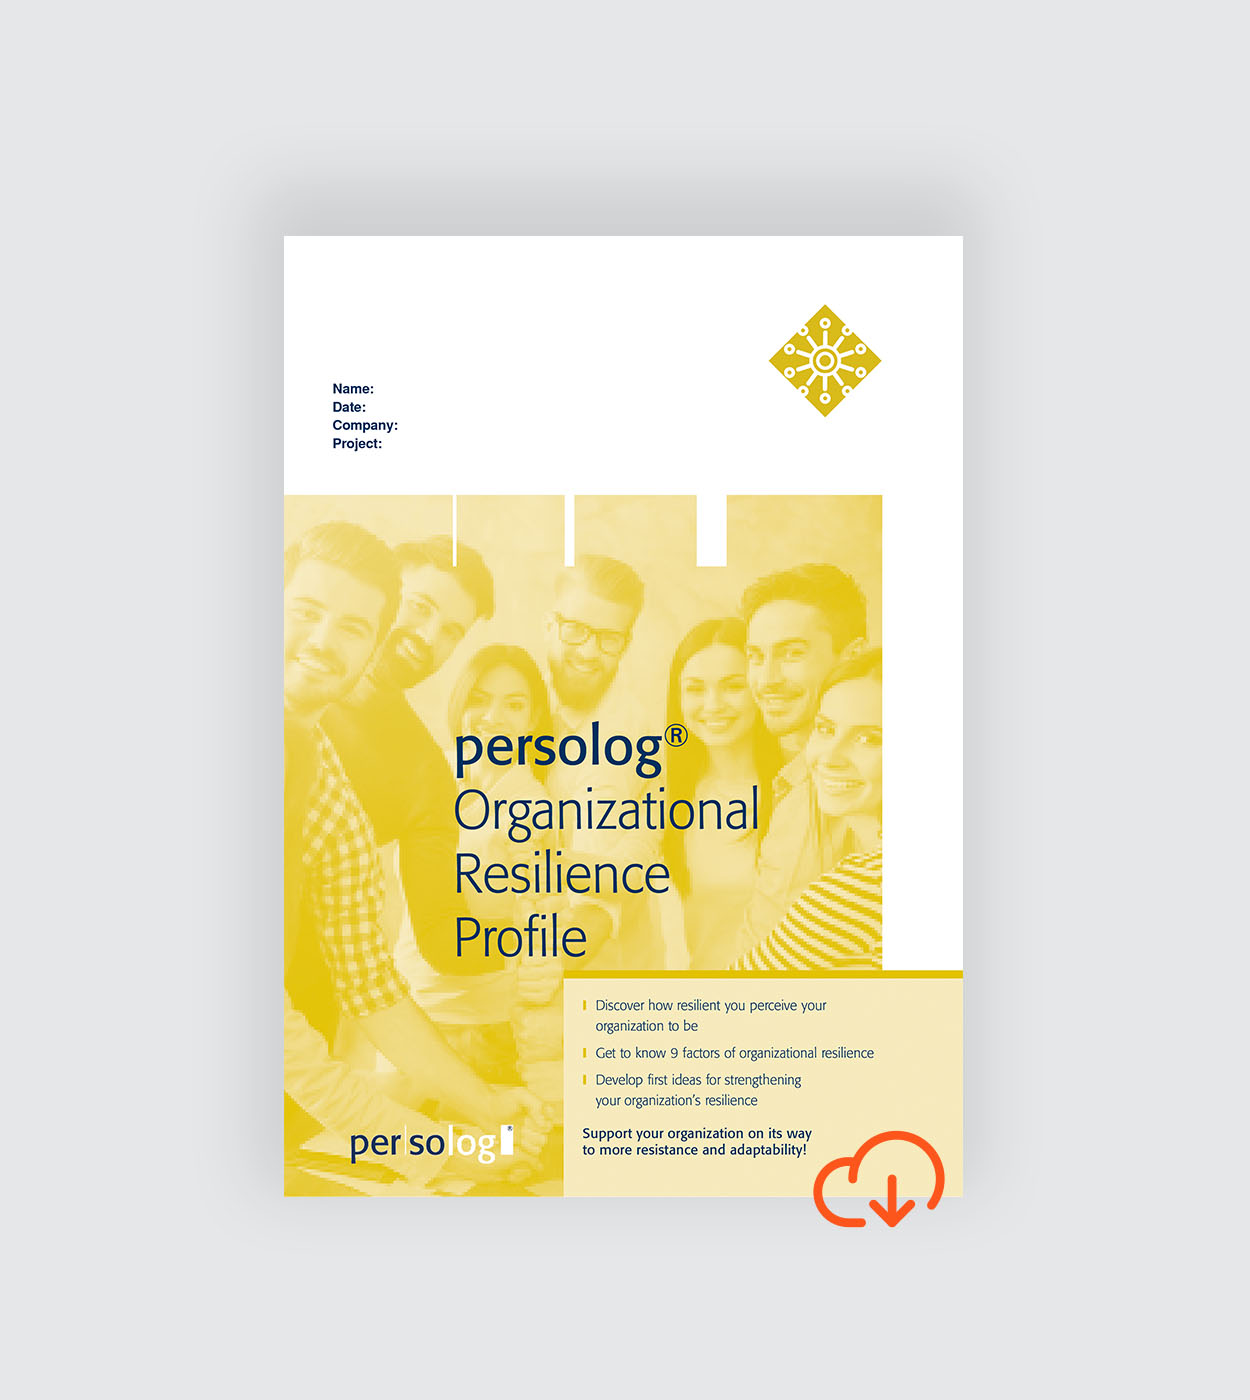 persolog® Organizational Resilience Profile online